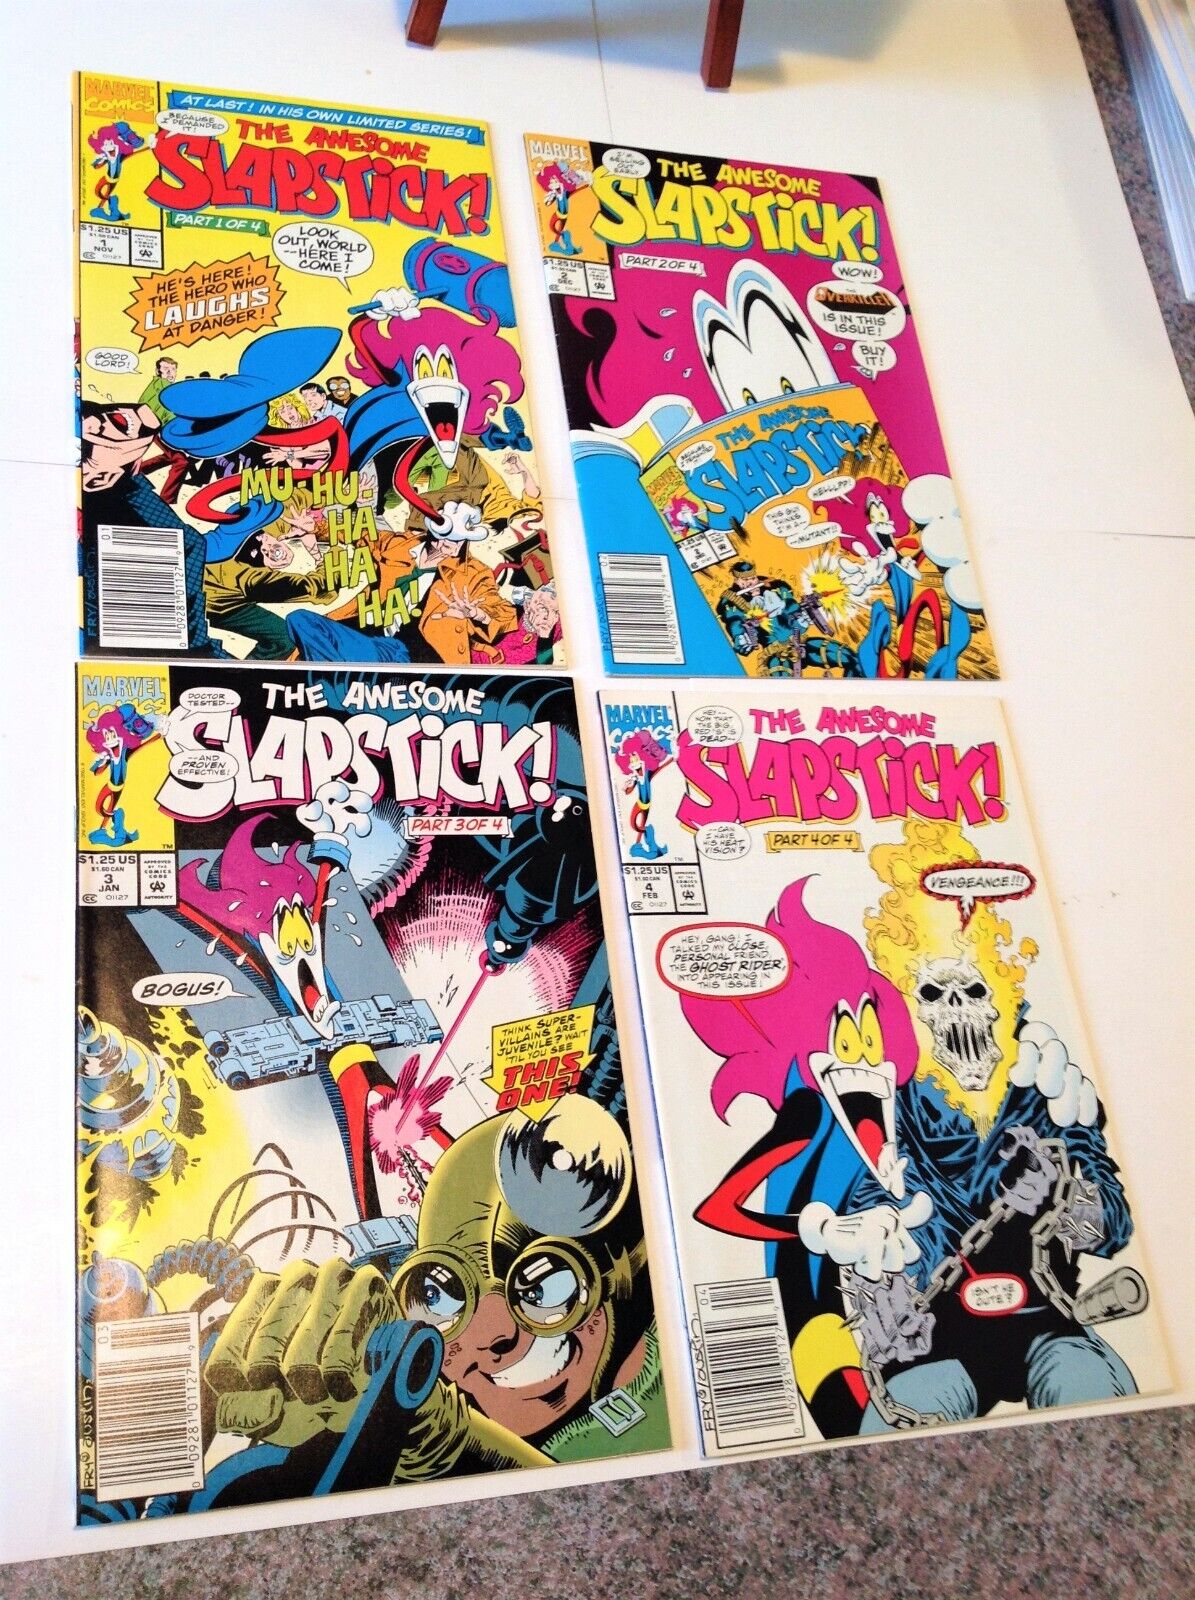 The Awesome Slapstick #1 #2 #3 #4 1992 Newsstand Editions